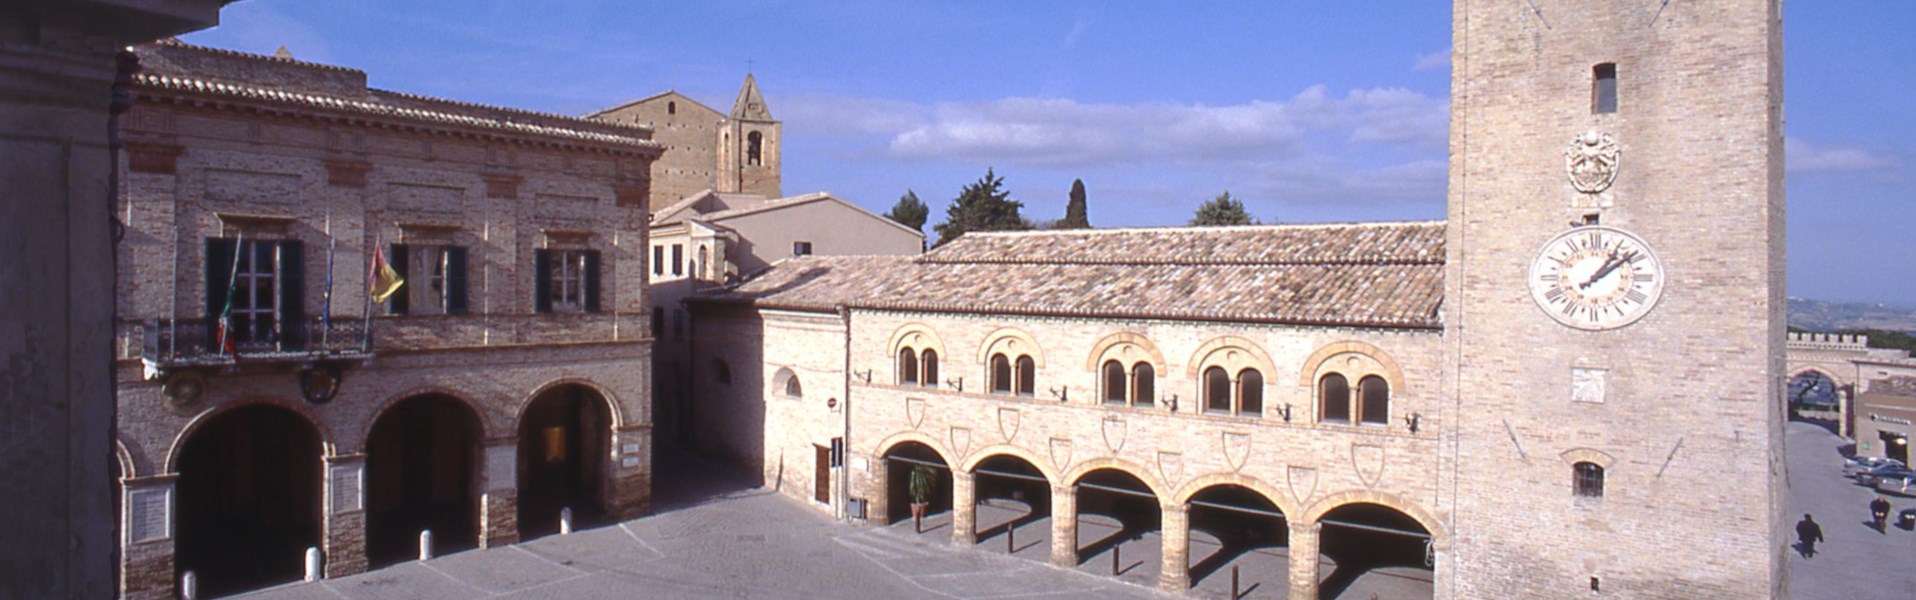 Montelupone - Piazza